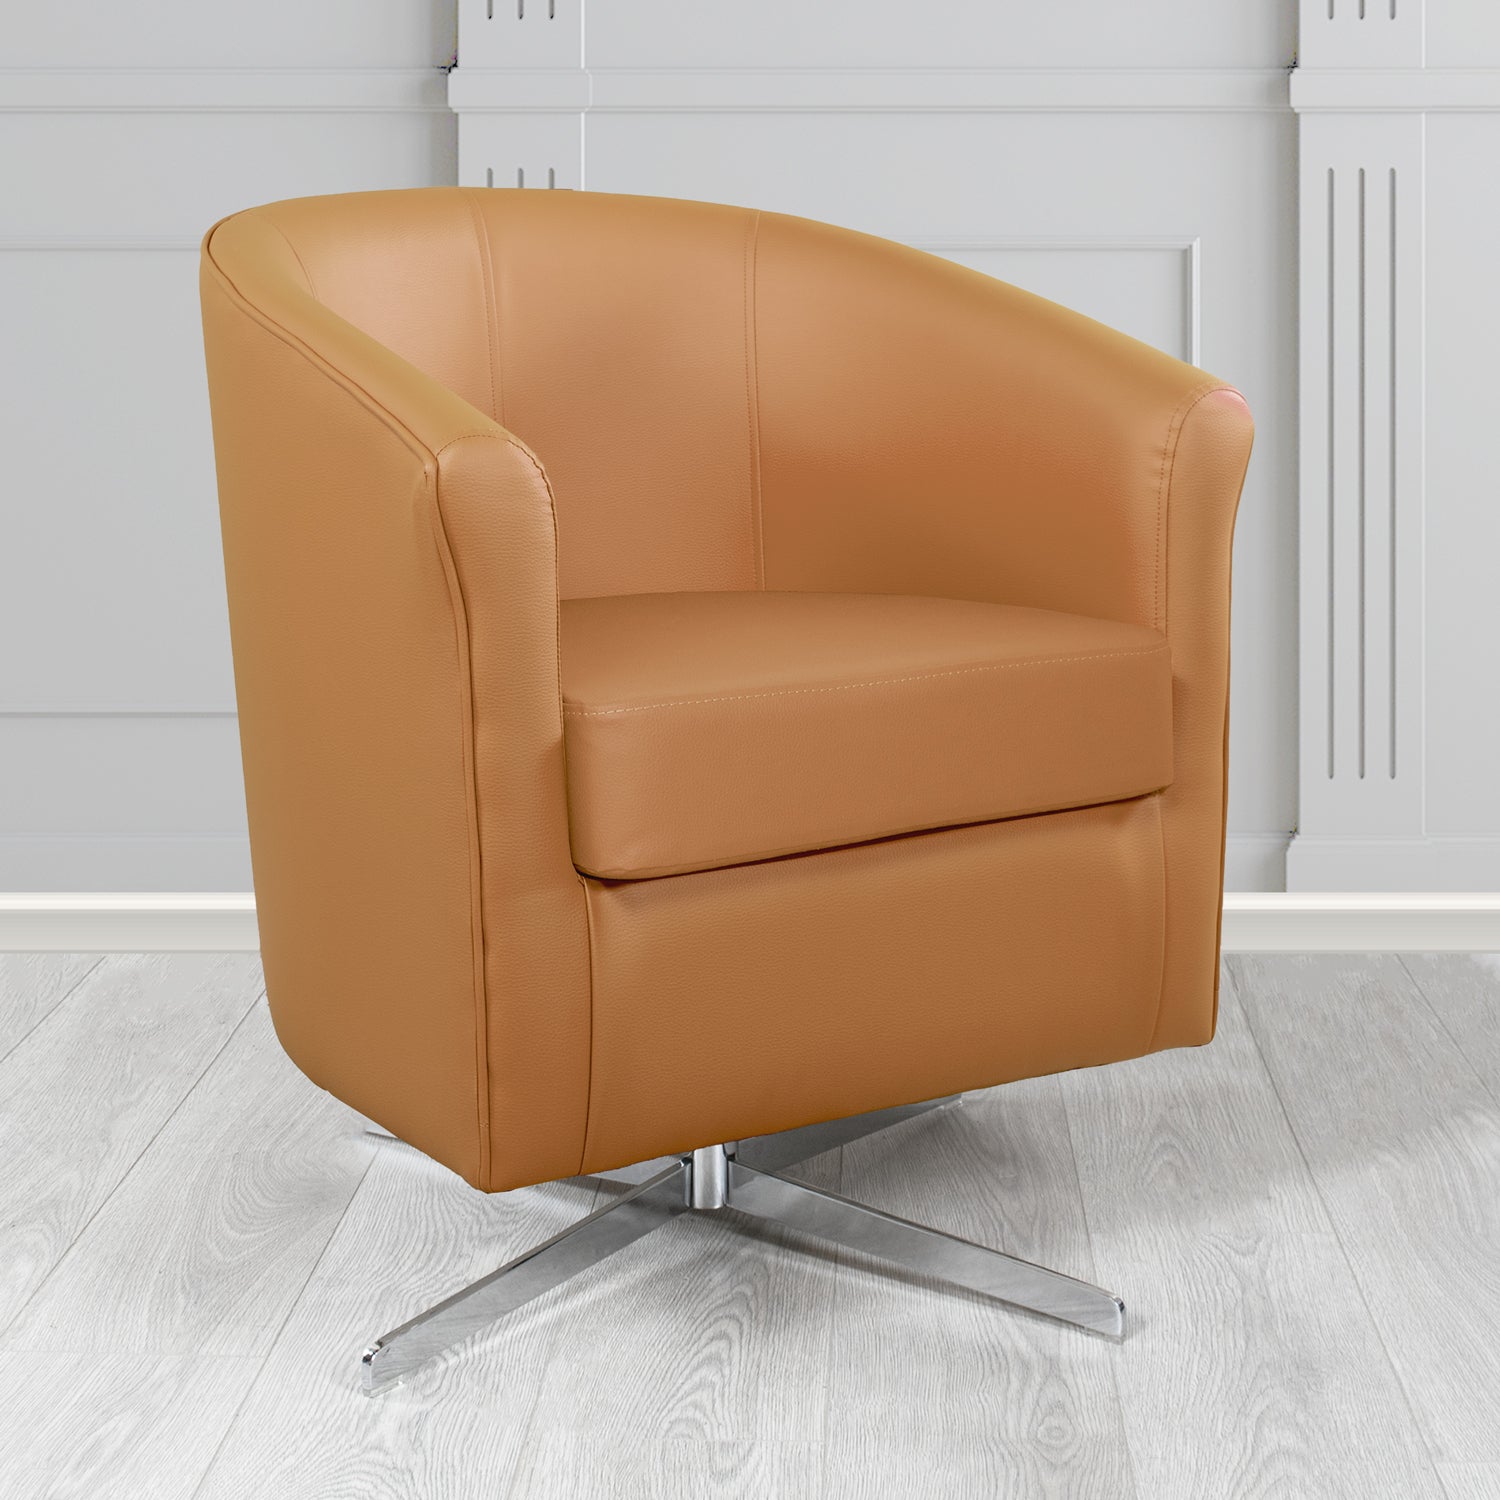 Cannes Swivel Tub Chair in Just Colour Fudge Crib 5 Faux Leather